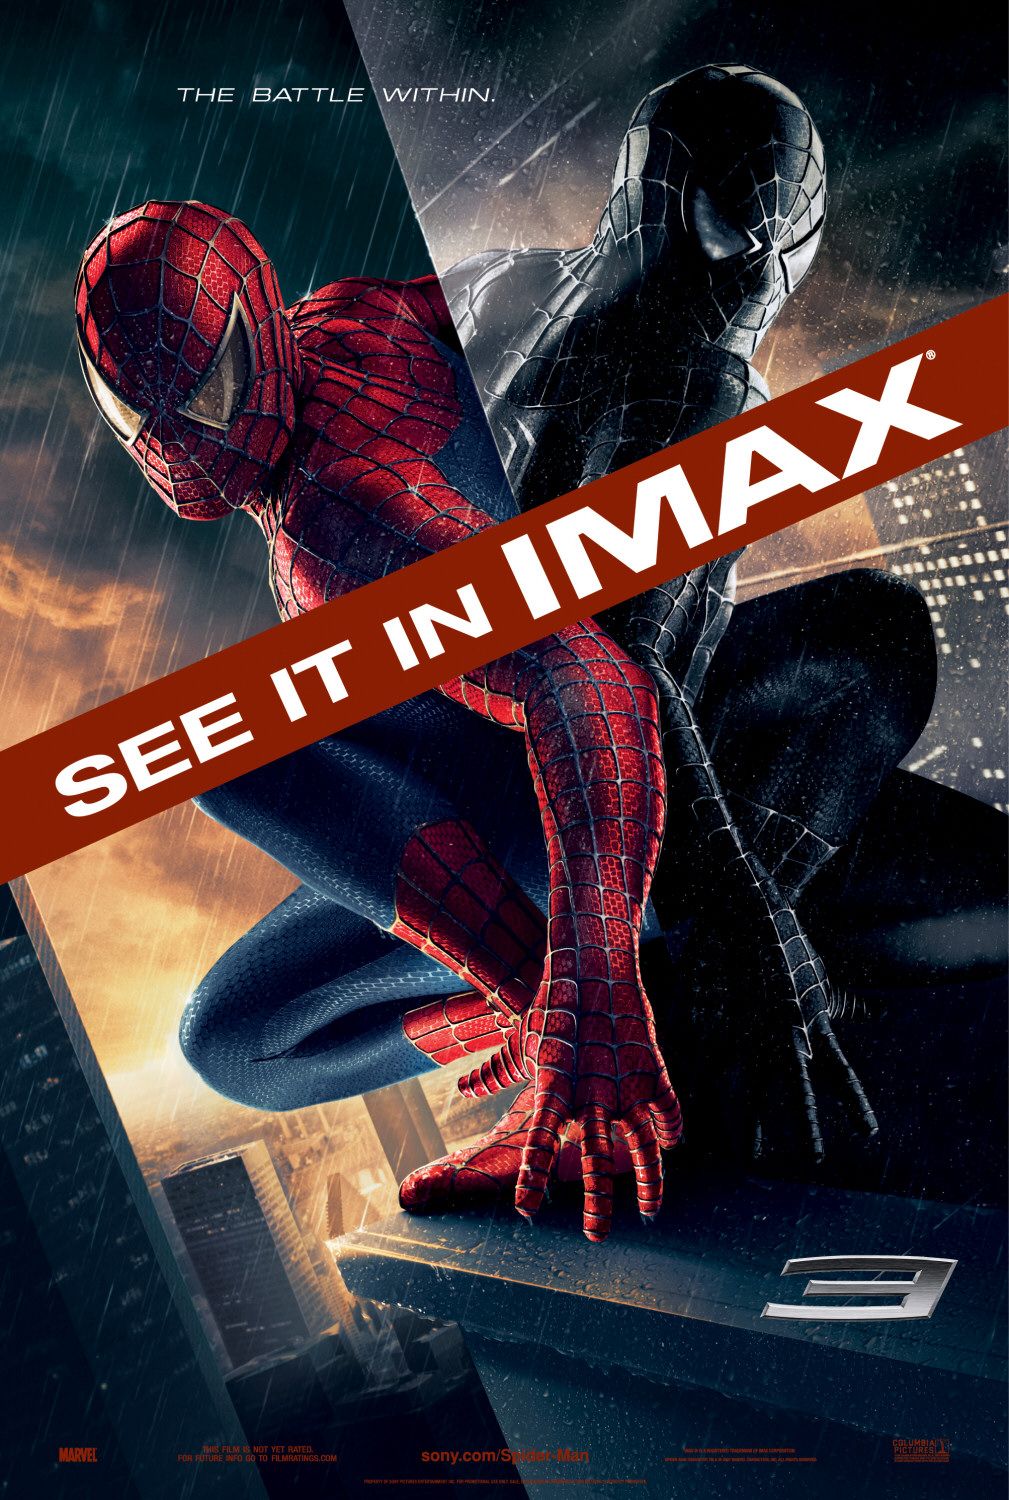 Extra Large Movie Poster Image for Spider-man 3 (#6 of 10)